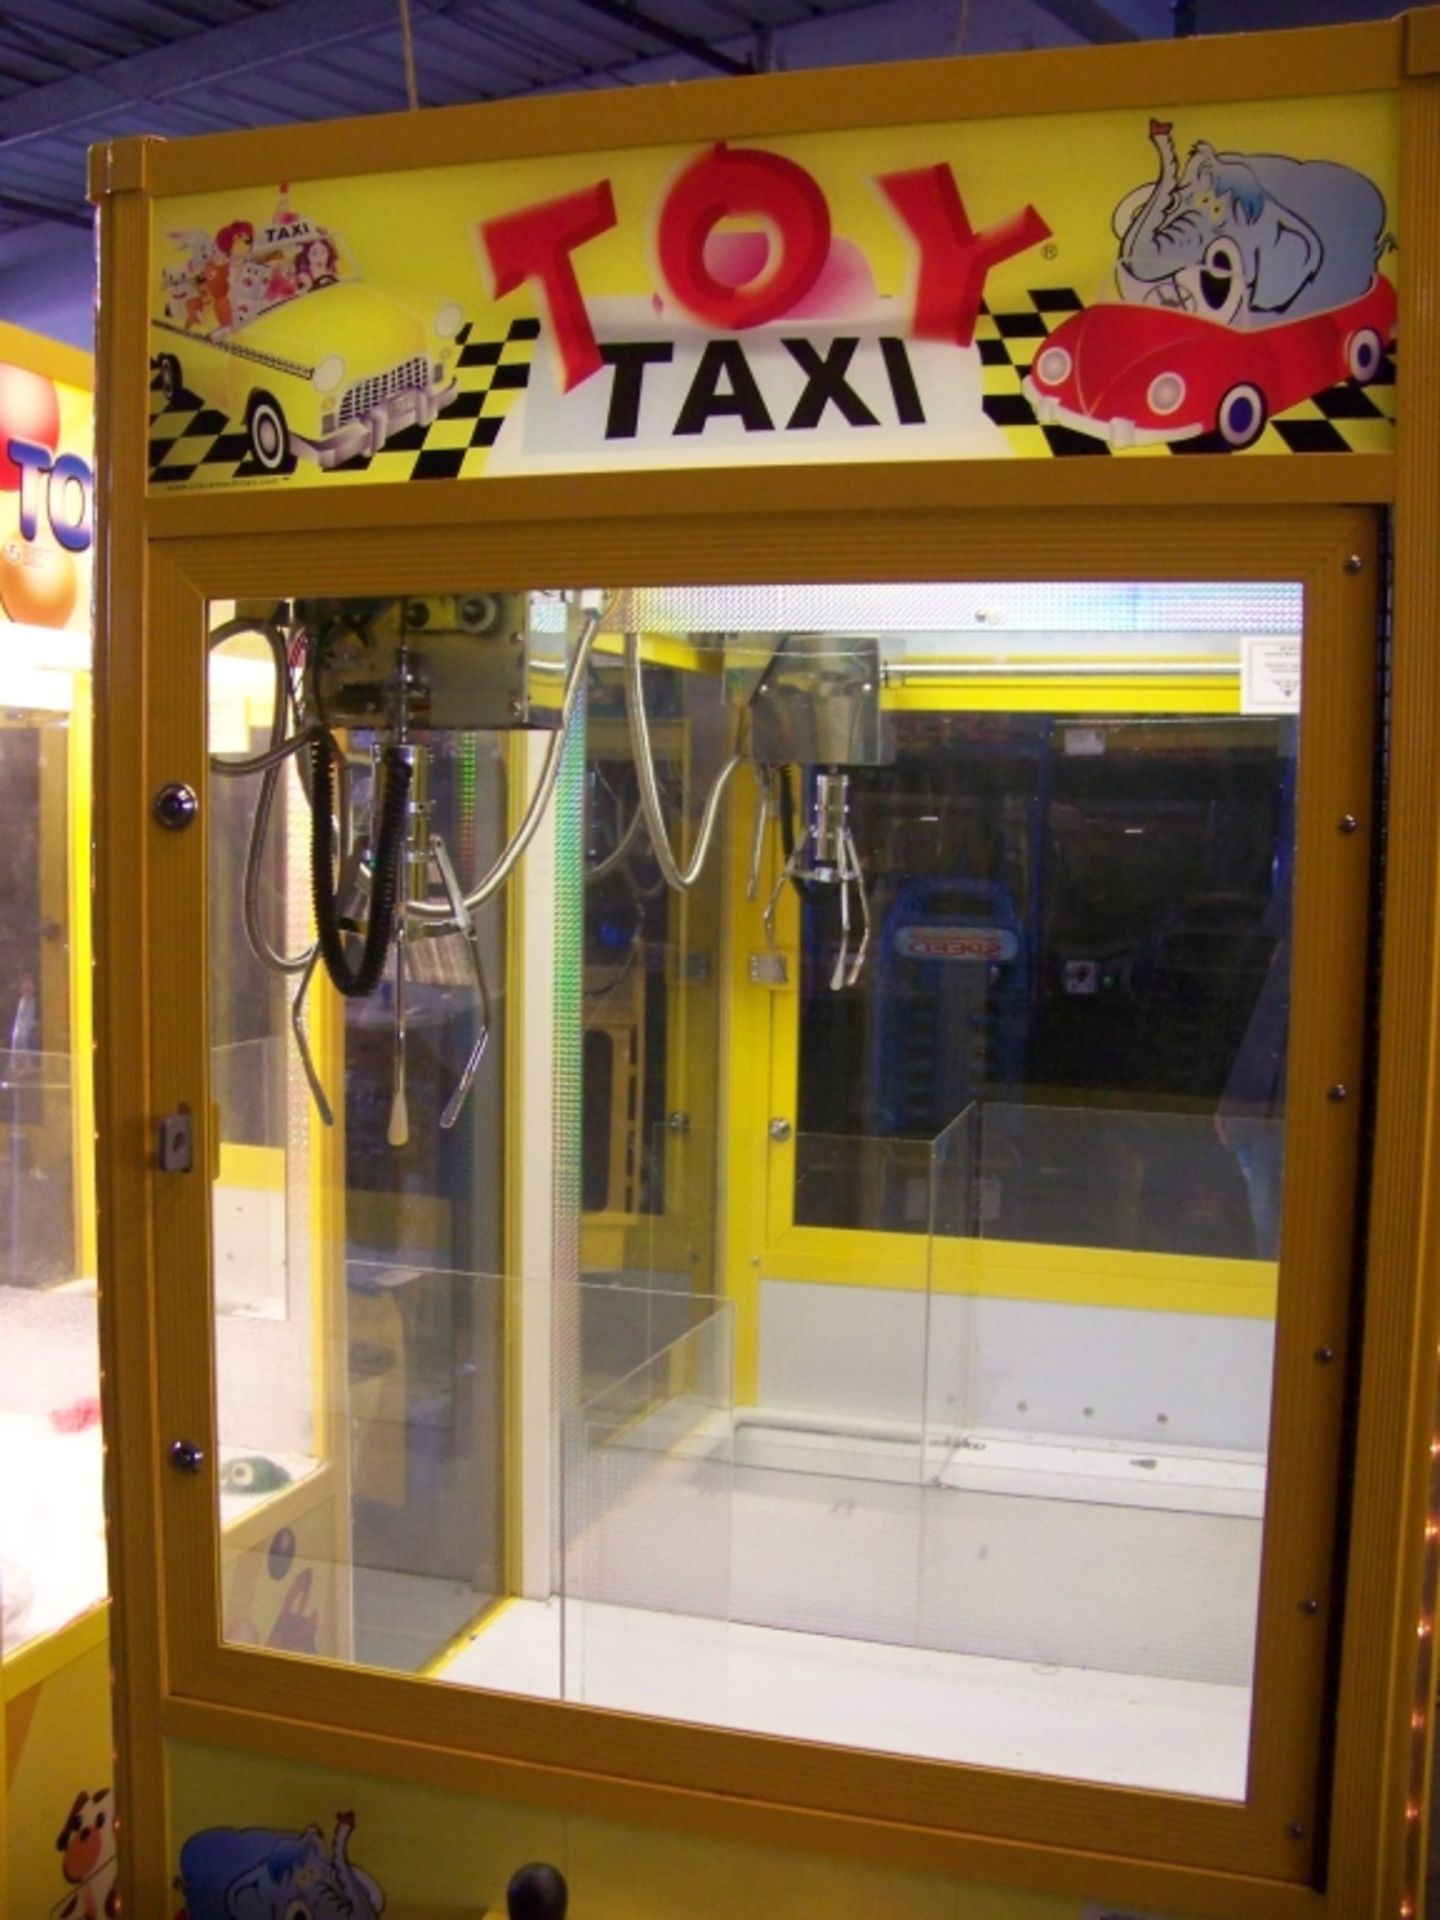 30"" TOY TAXI PLUSH CLAW CRANE MACHINE Item is in used condition. Evidence of wear and commercial - Image 4 of 4